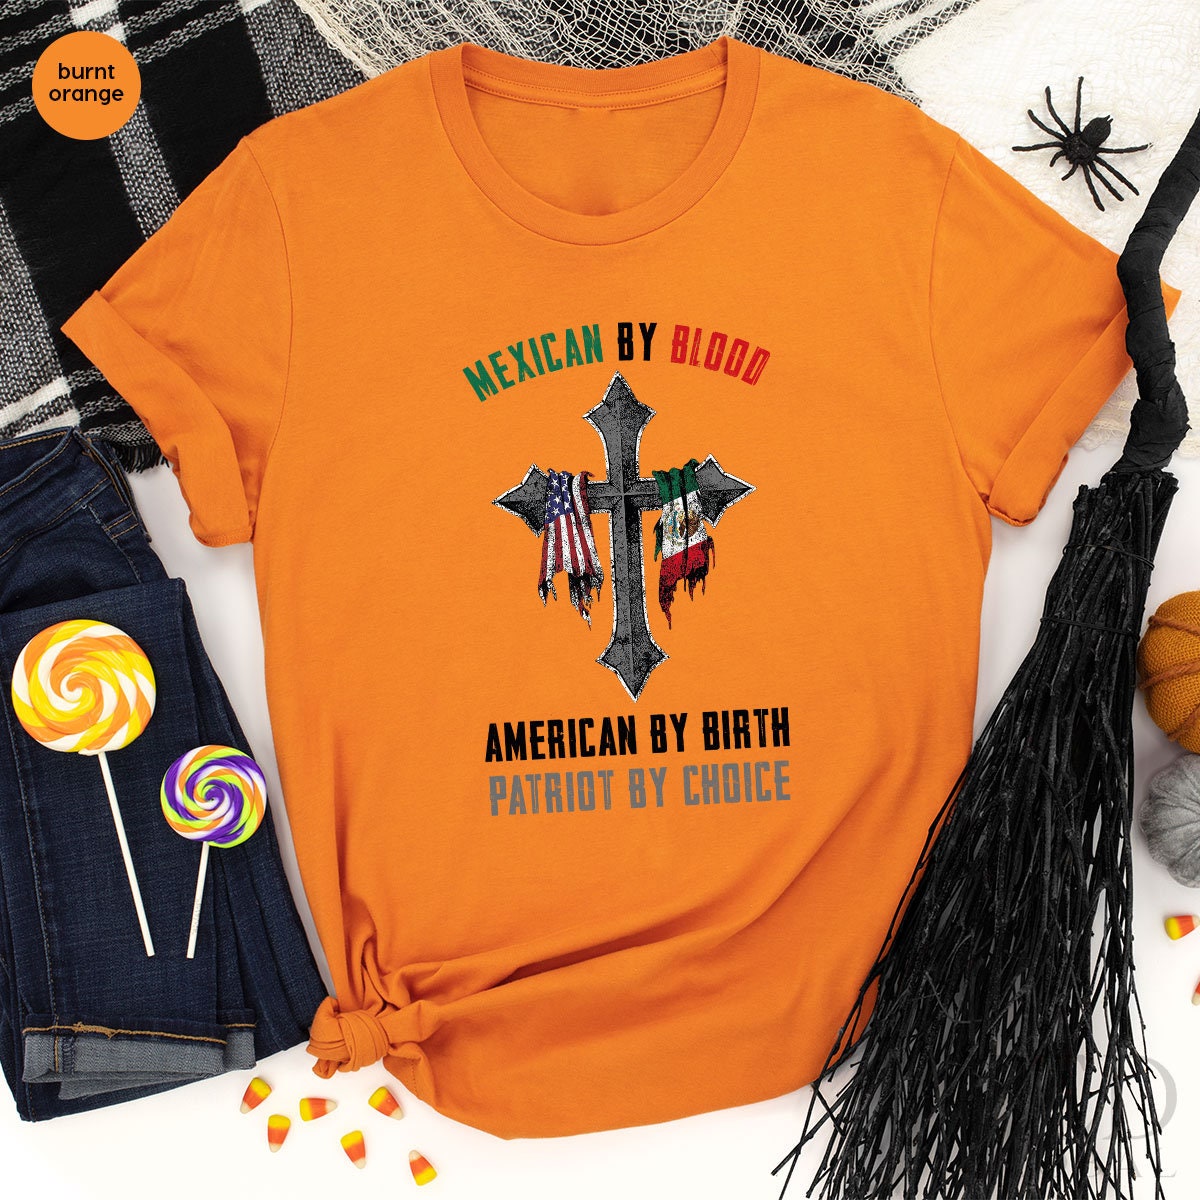 Cute Mexican Shirt, American T Shirt, Mexican By Blood T Shirt, American By Birth Shirts, Patriot By Choice T-Shirt, Gift For Mexican - Fastdeliverytees.com